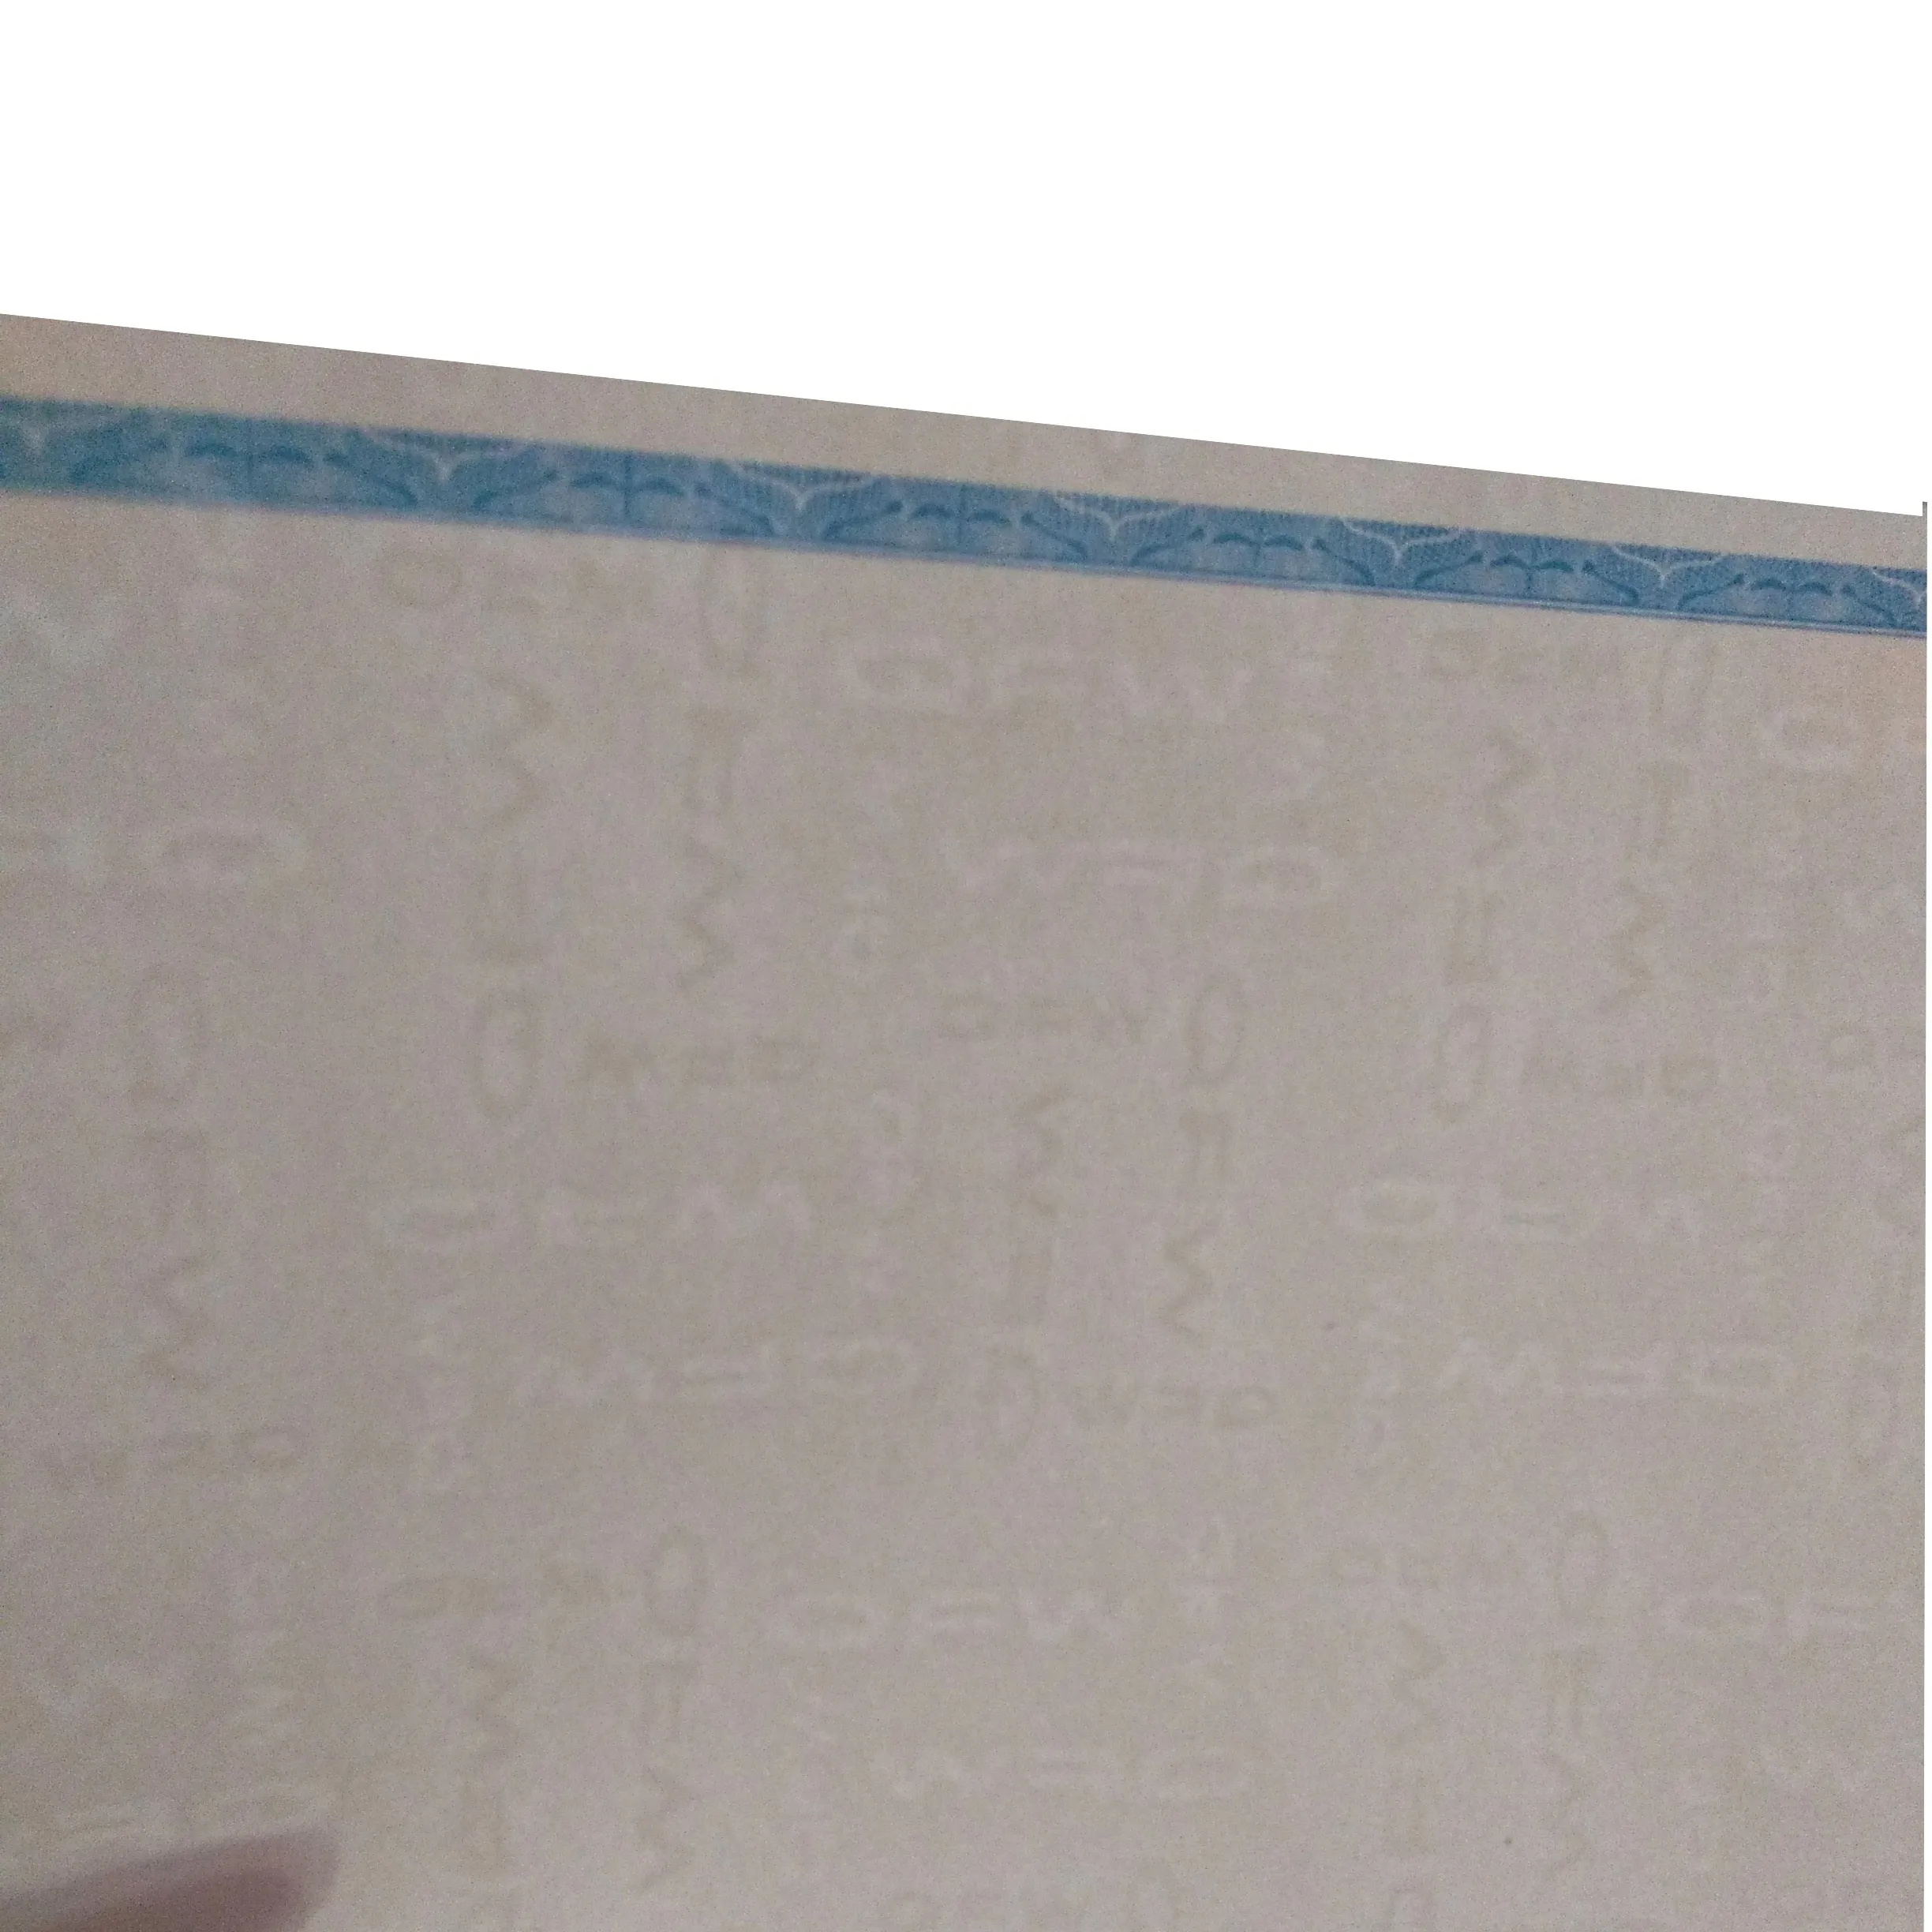 Anti-counterfeiting security paper with special pattern printing